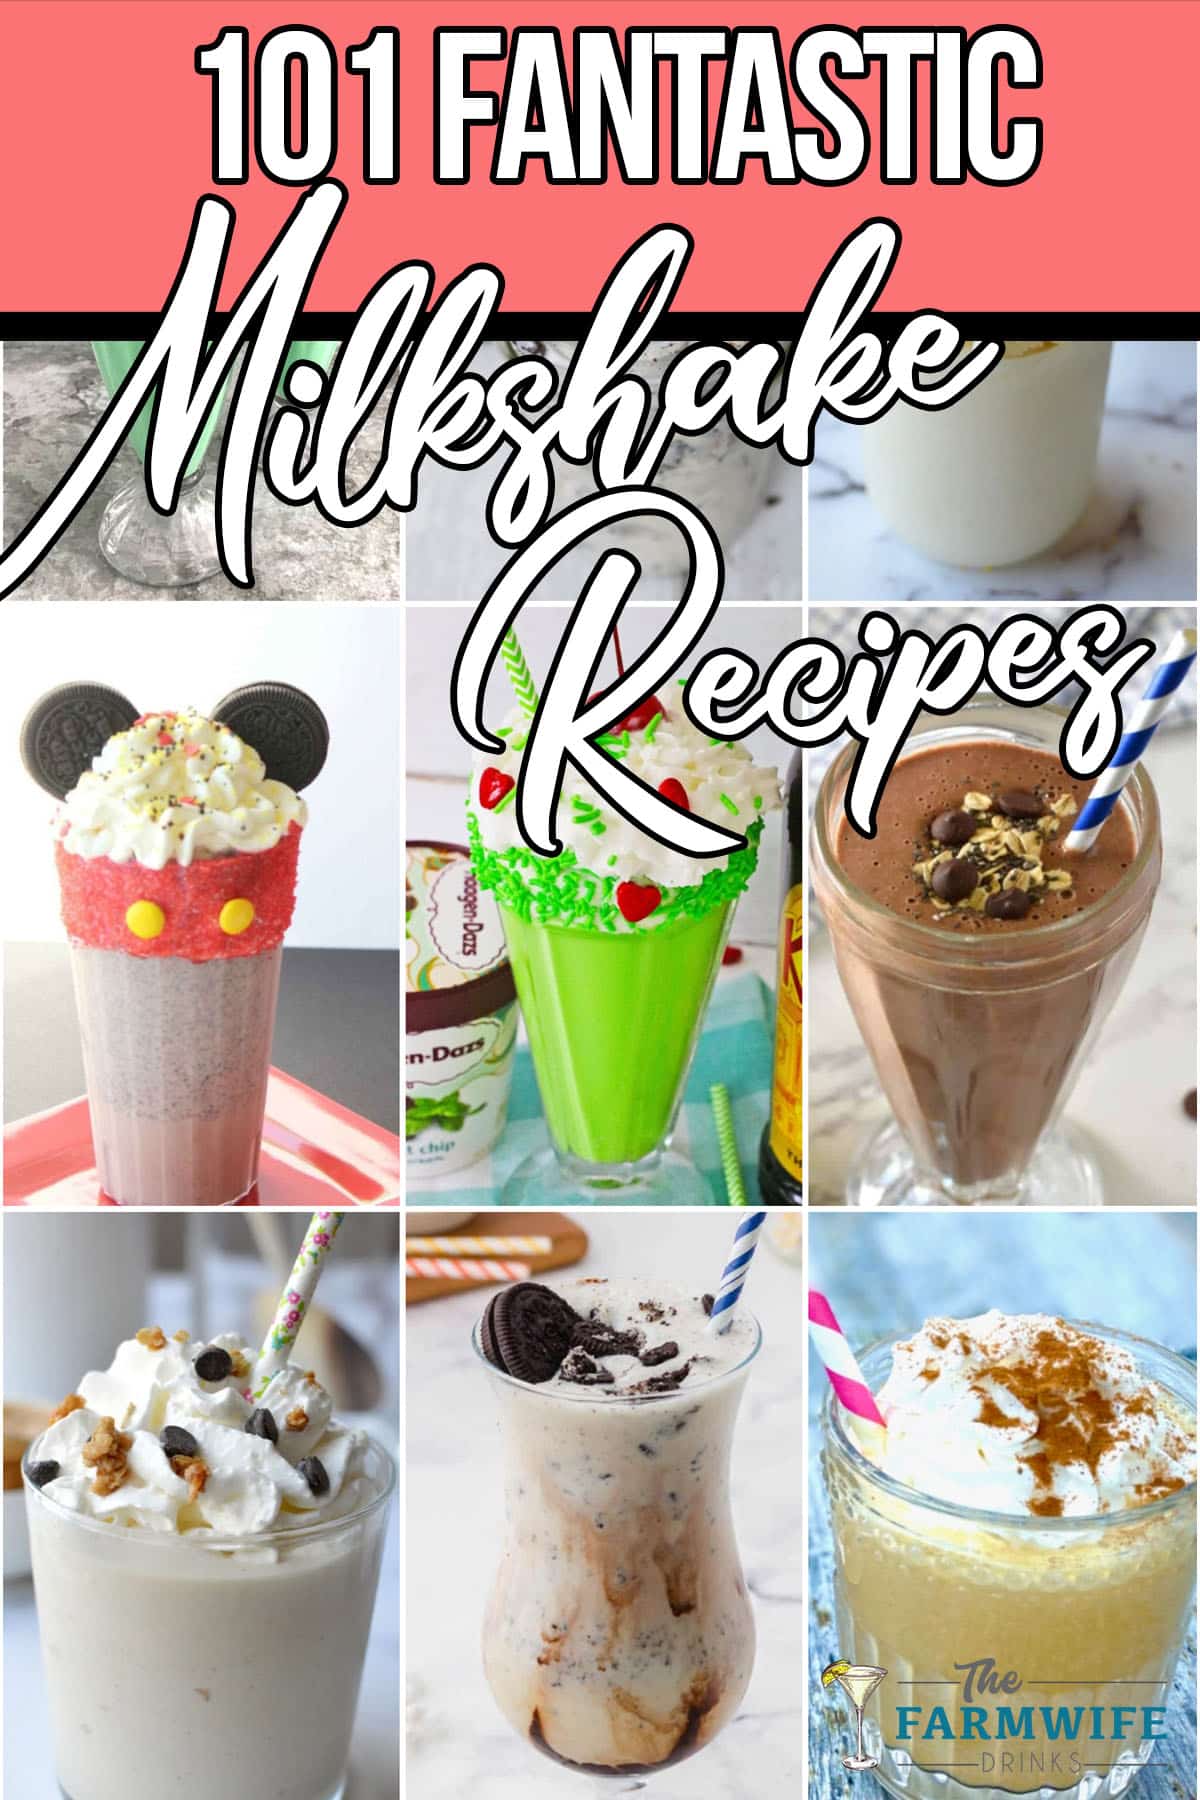 photo collage of simple milkshake recipes with text which reads 101 fantastic milkshake recipe